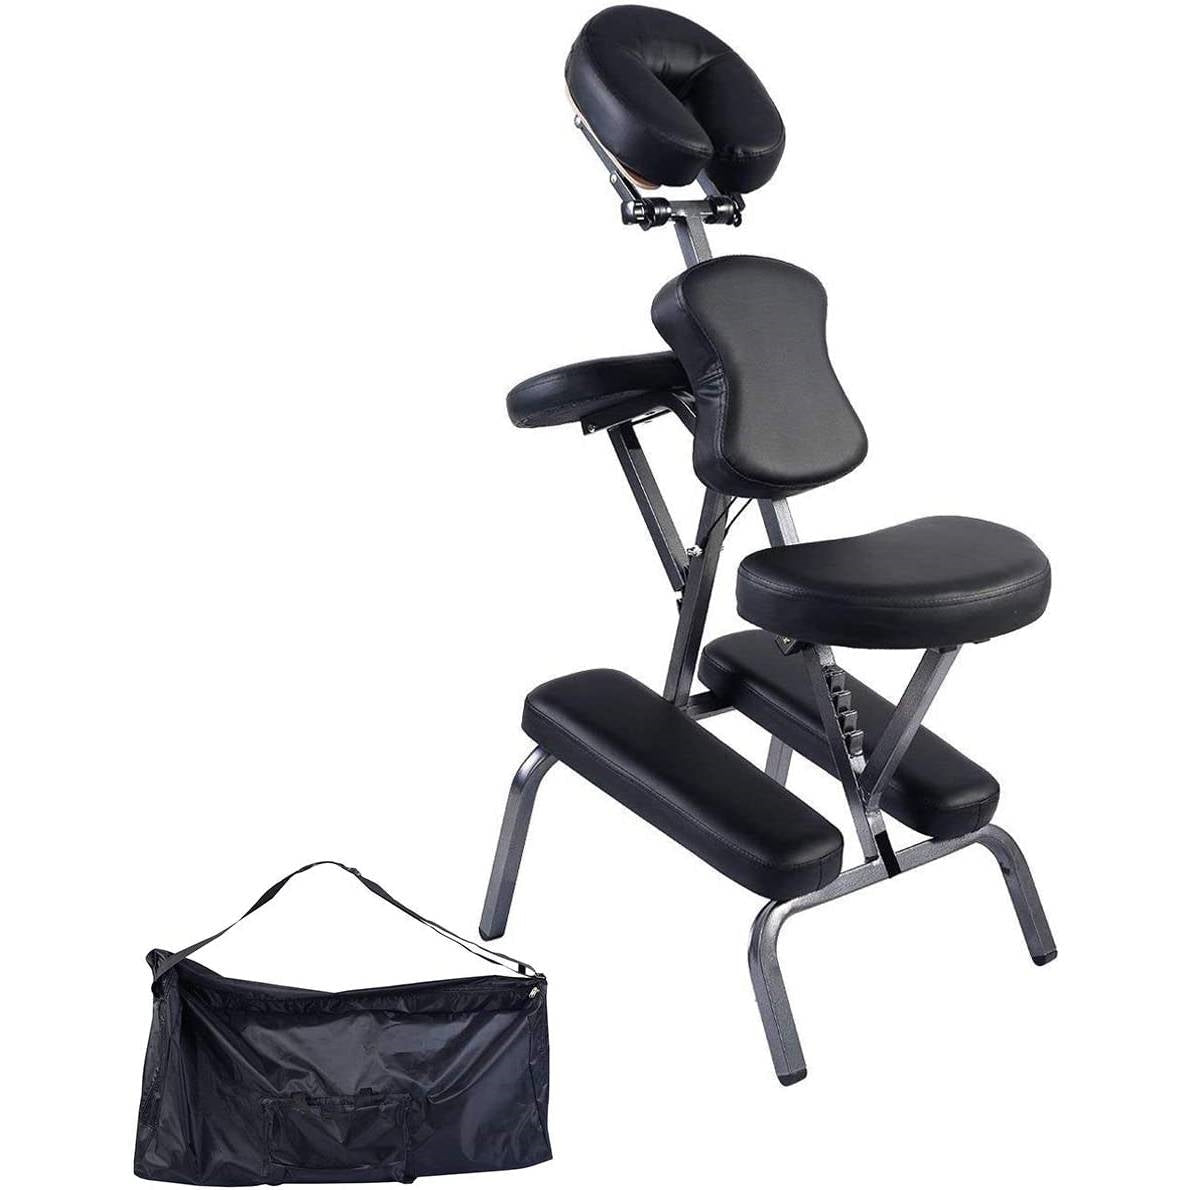 Accents > Massage Tables - Black Portable Massage Tattoo Chair With Carrying Bag